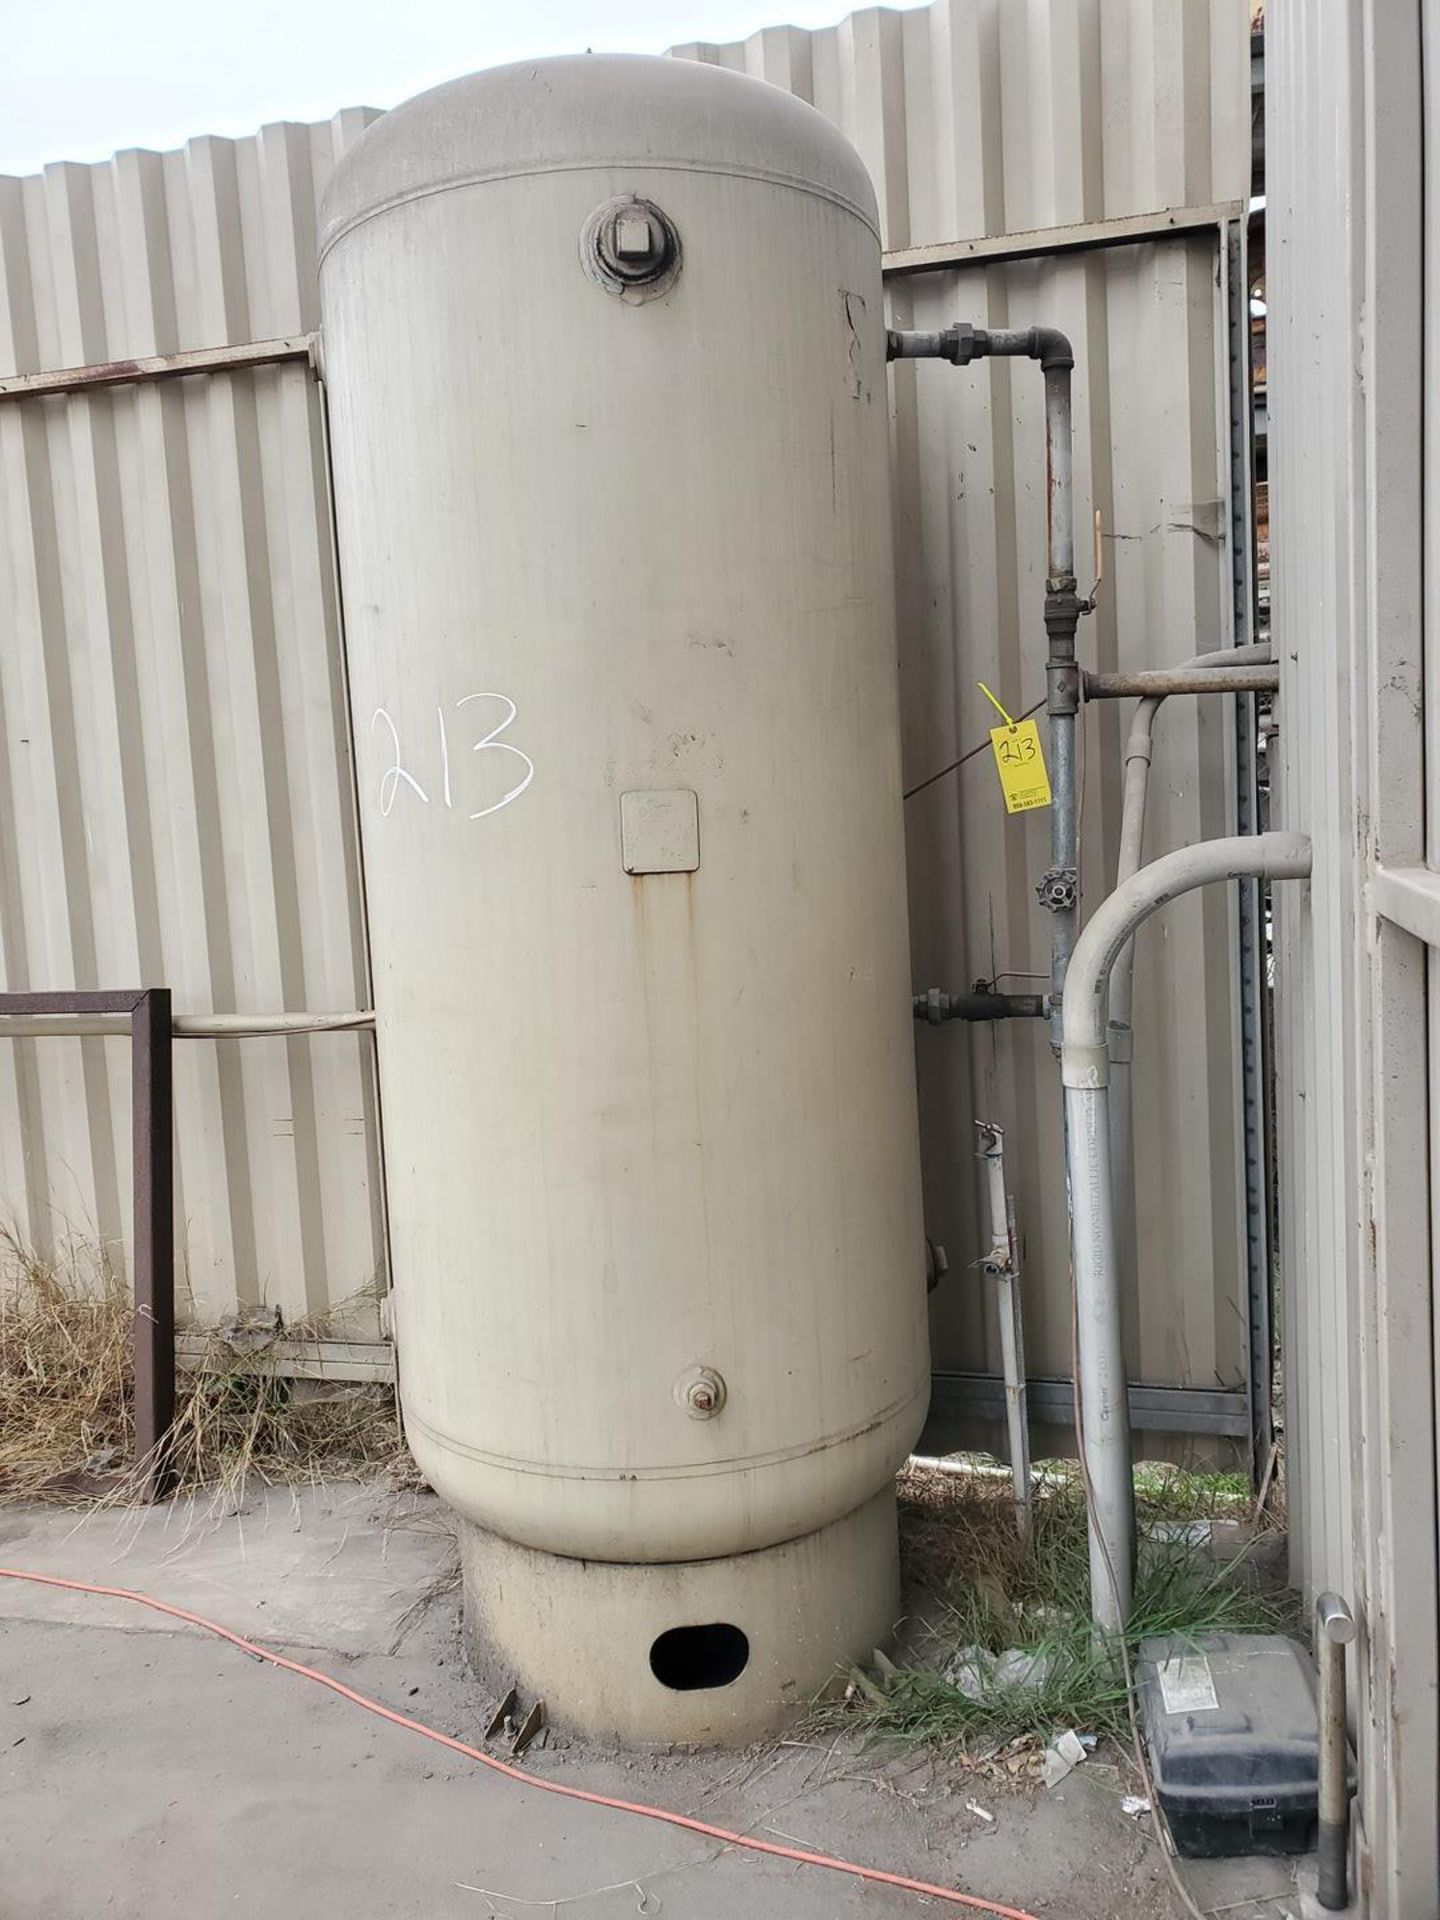 2008 Manchester Tank Receiver Tank MAWP: 165psi@650F, MDMT: -20F@165psi, 400gal - Image 3 of 4